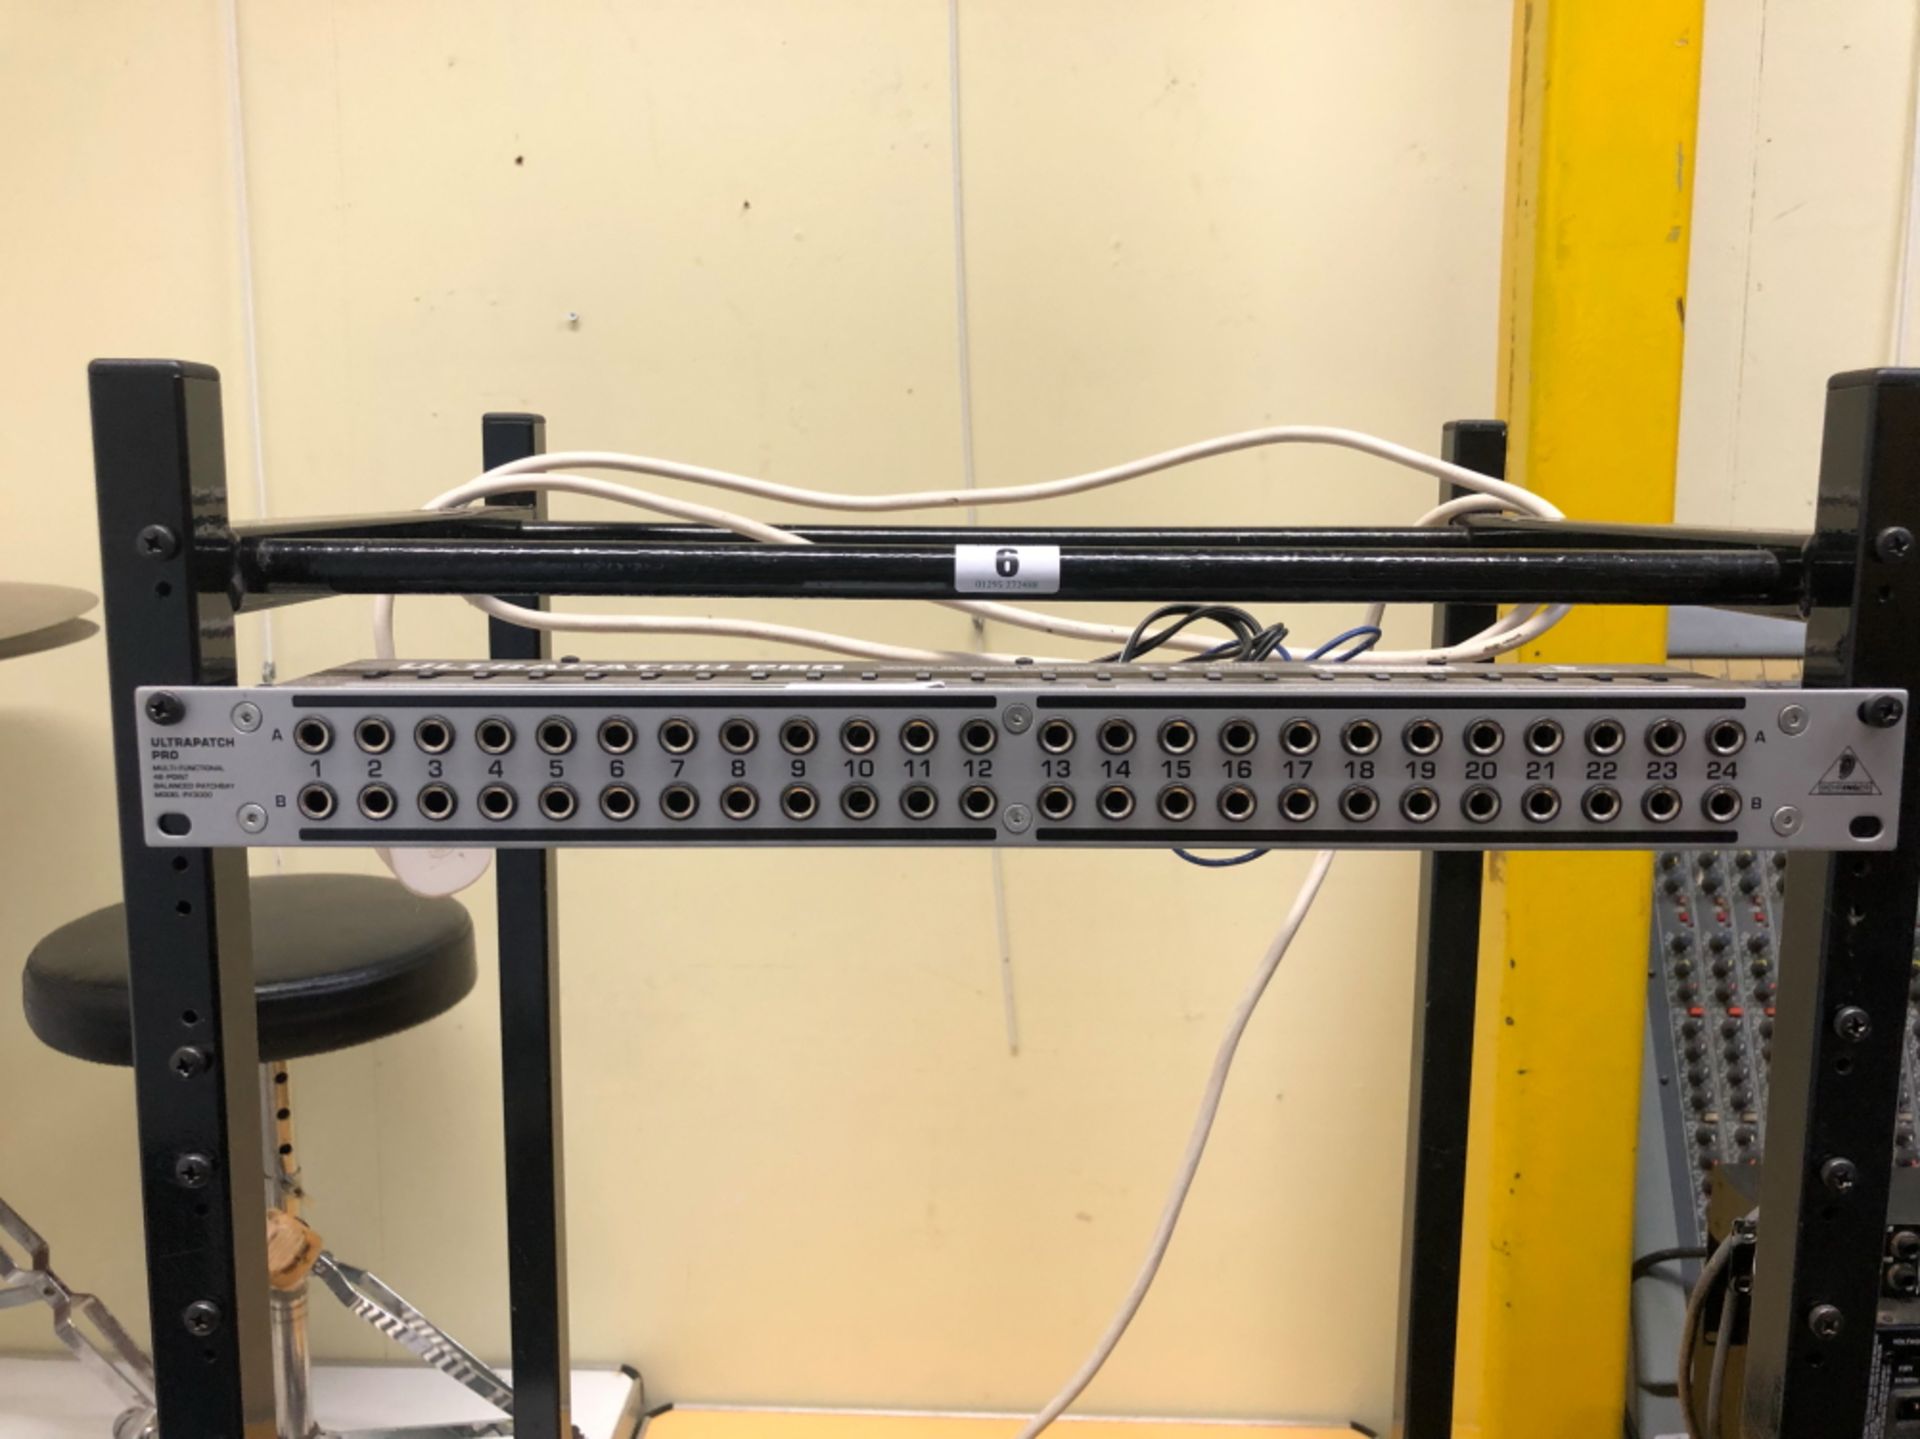 RACK MOUNT/STAND WITH BEHRINGER - ULTRA PATCH PRO 48 POINT PATCHBAY 51 x x 91 x 38 cms, MODEL - Image 2 of 8